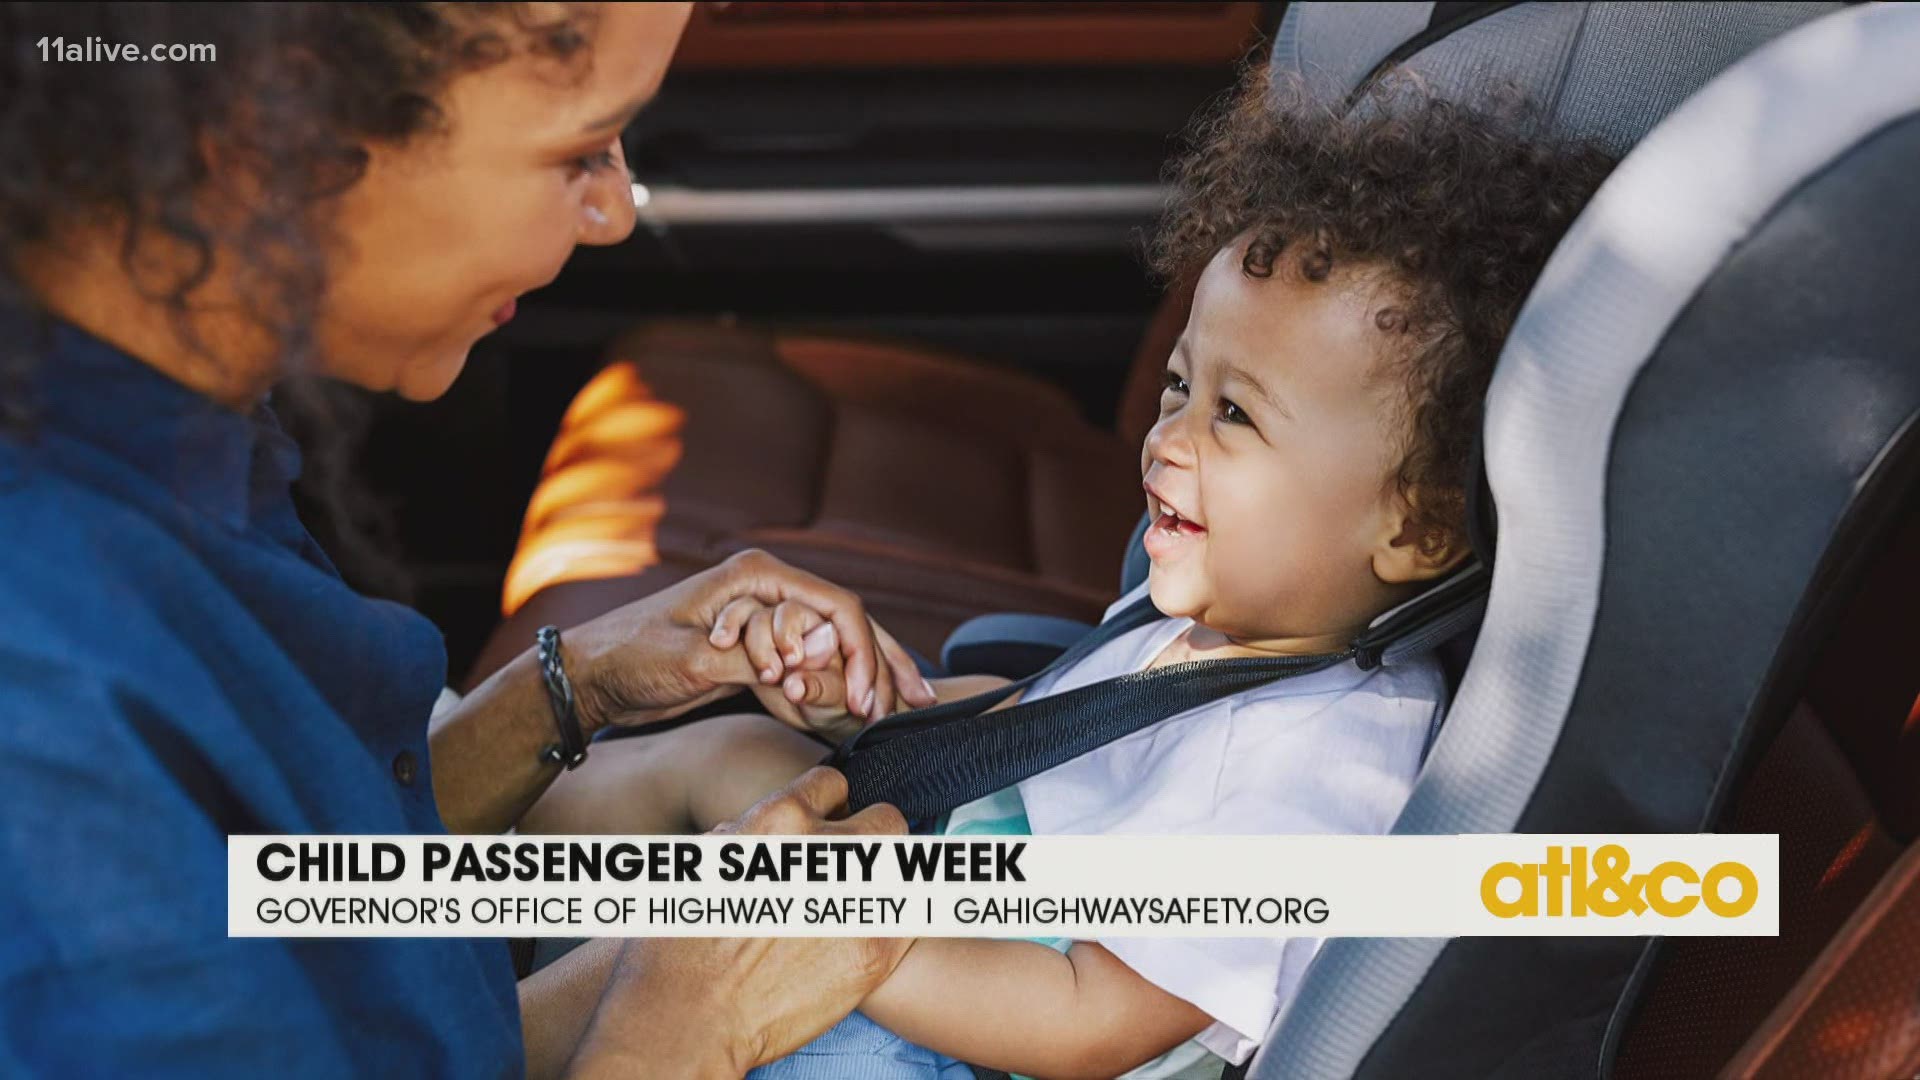 Amanda Jackson from the Governor's Office of Highway Safety shares tips to keep kids safely secured in their car seat.